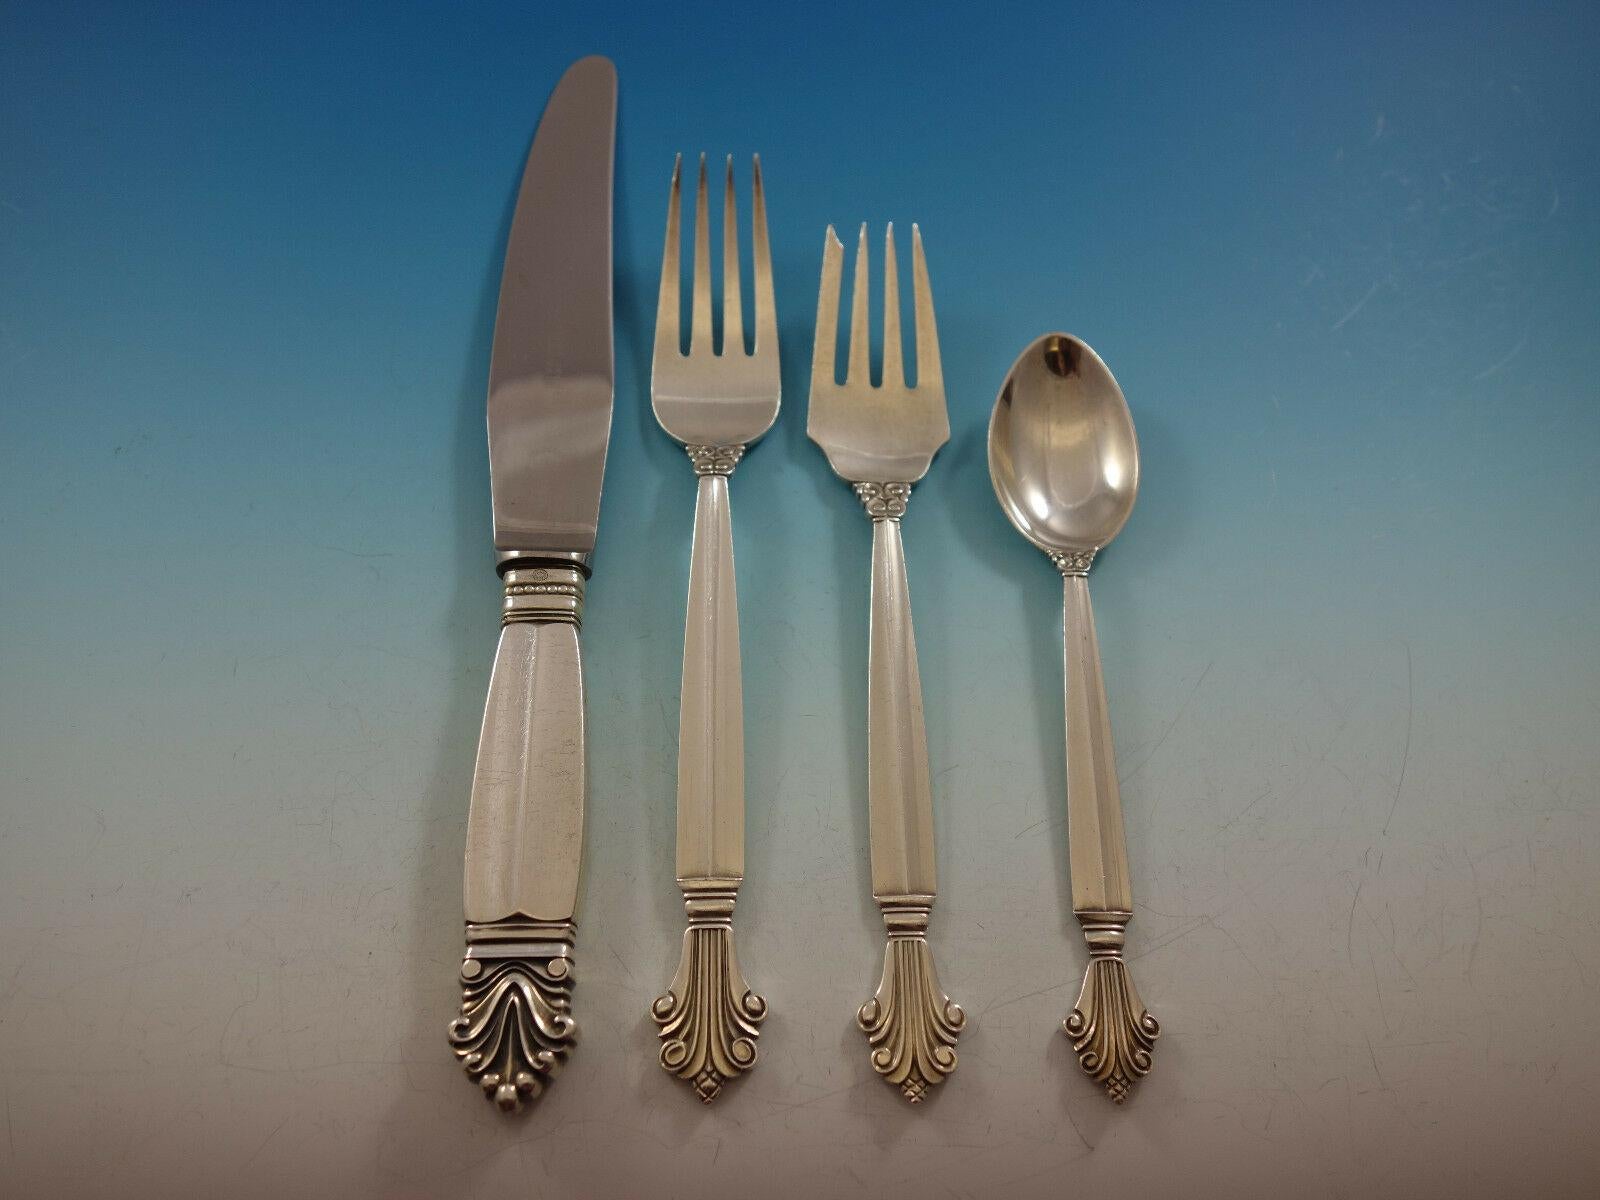 Exquisite Acanthus by Georg Jensen sterling silver dinner size flatware set - 44 pieces. This set includes:

8 dinner knives, short handle, 9